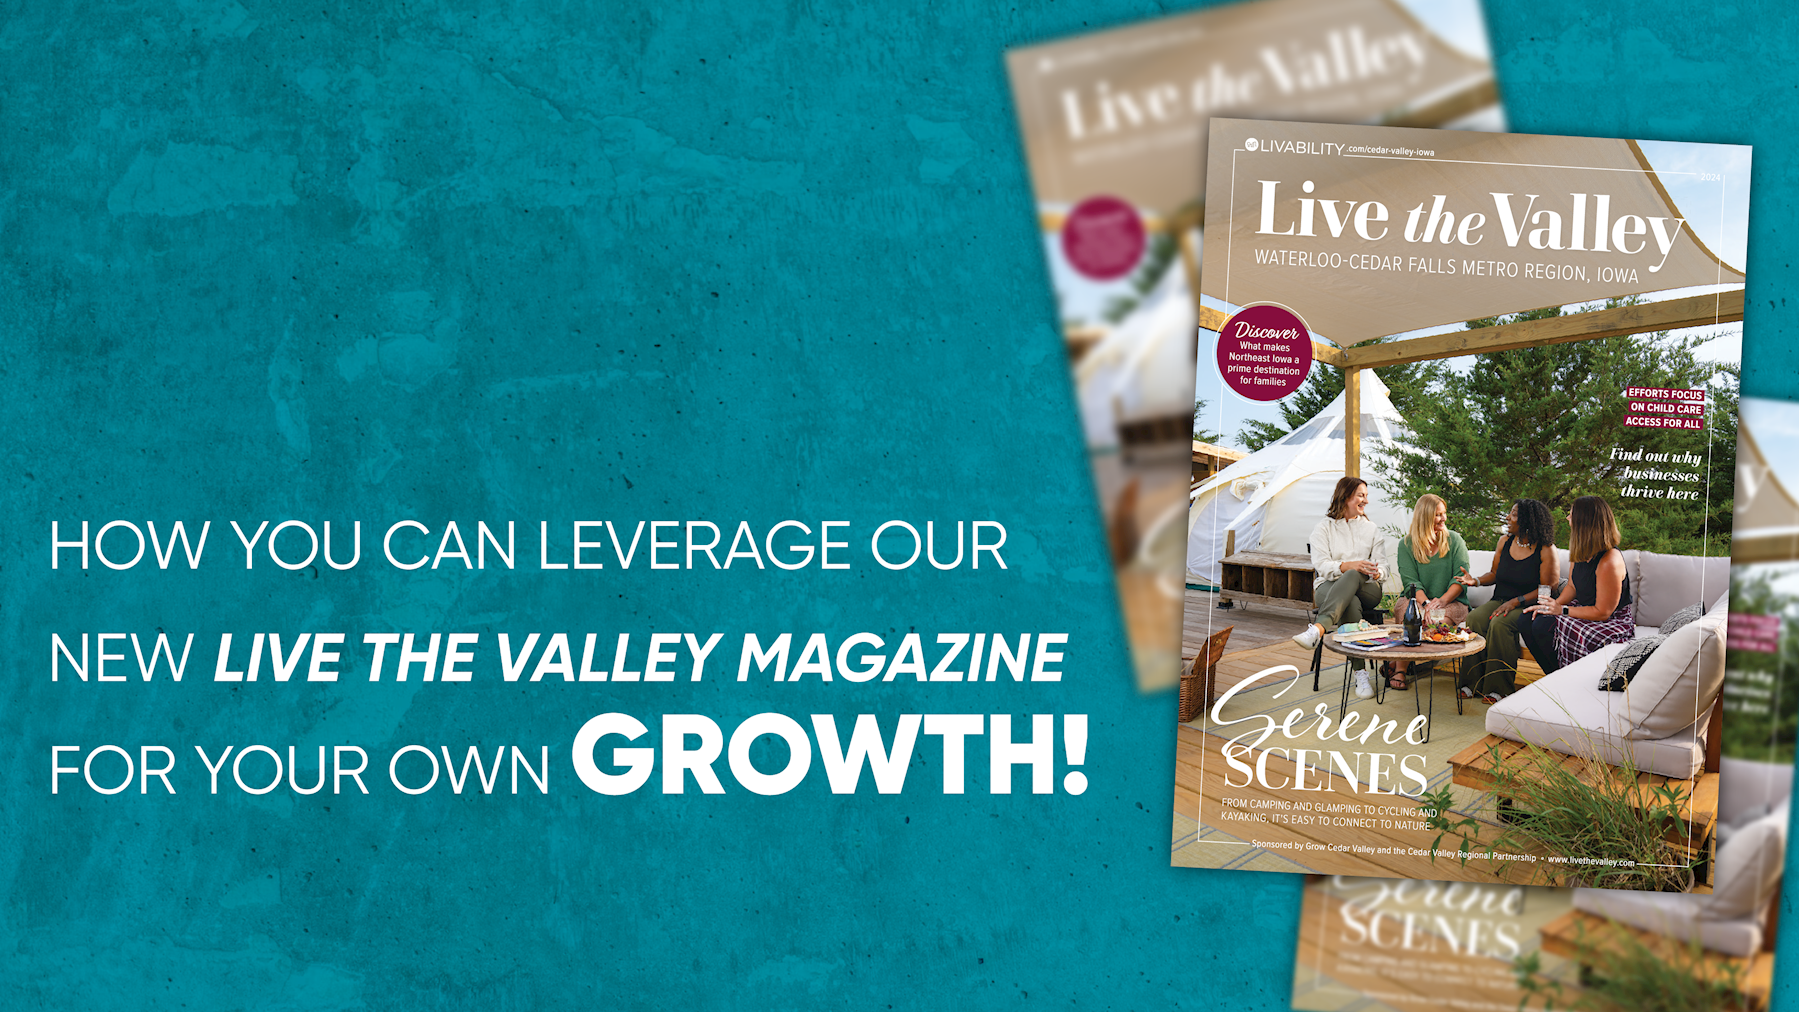 How You Can Leverage Our New Live the Valley Magazine for Your Own Growth!